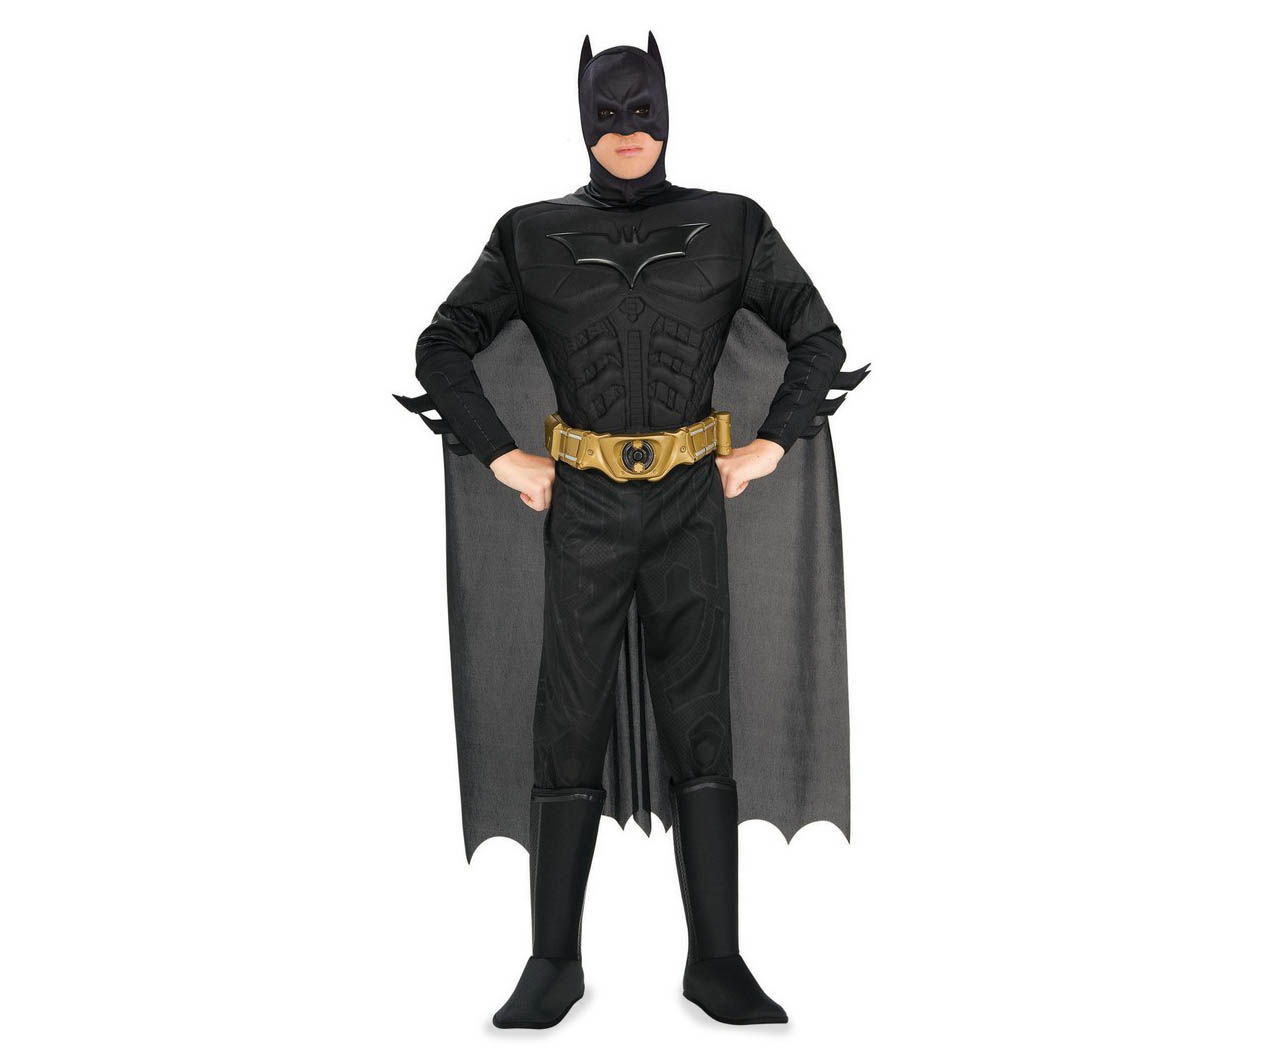 Adult Size L The Dark Knight Batman Deluxe Muscle Chest Costume